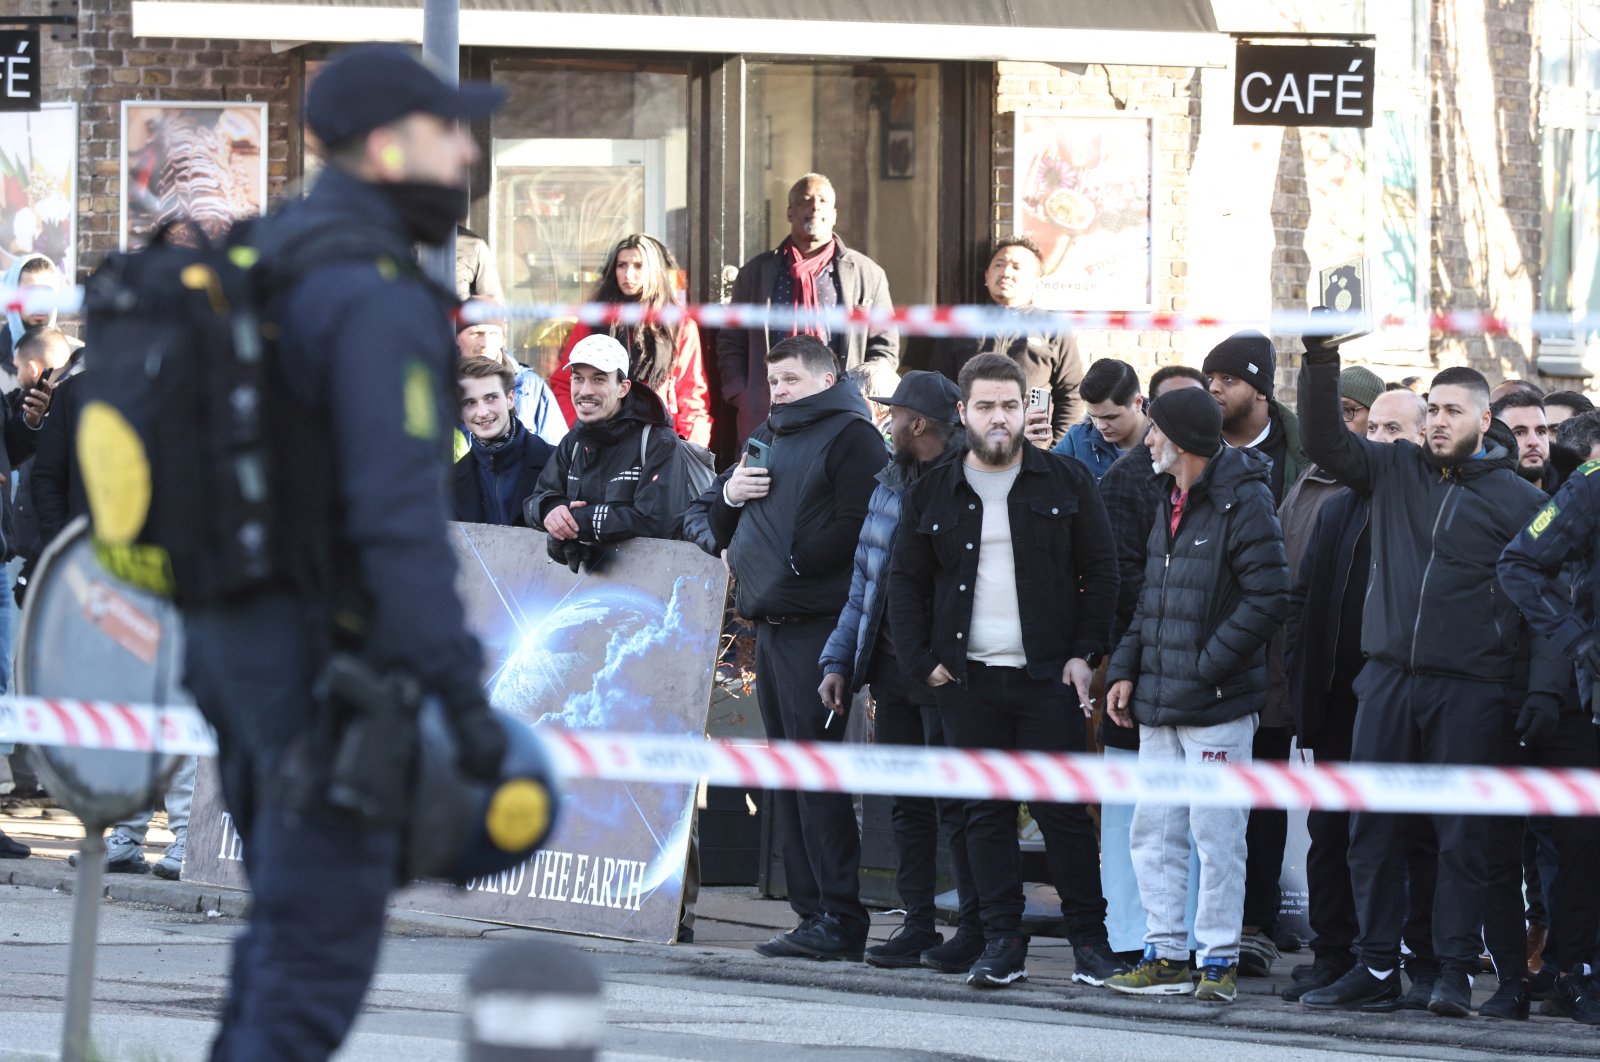 Police patrol the area in front of a mosque at Noerrebro, where Danish far-right politician Rasmus Paludan has announced that he will burn a copy of the Quran, in Copenhagen, Denmark, Friday, Jan. 27, 2023. (Reuters File Photo)